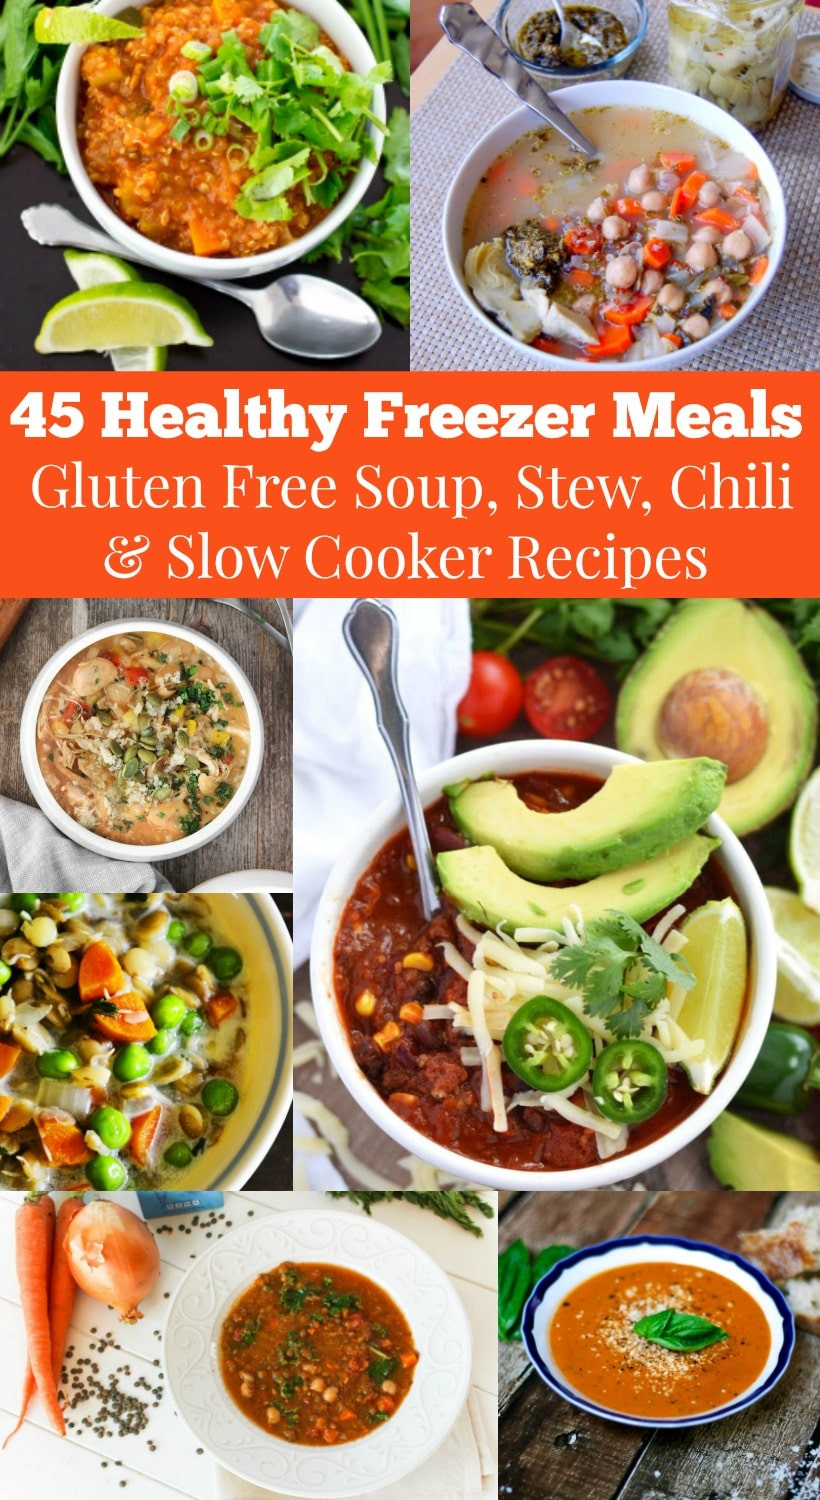 Healthy Gluten Free Dinner Recipes
 45 Healthy Freezer Meals to Help You Reclaim Dinner Time